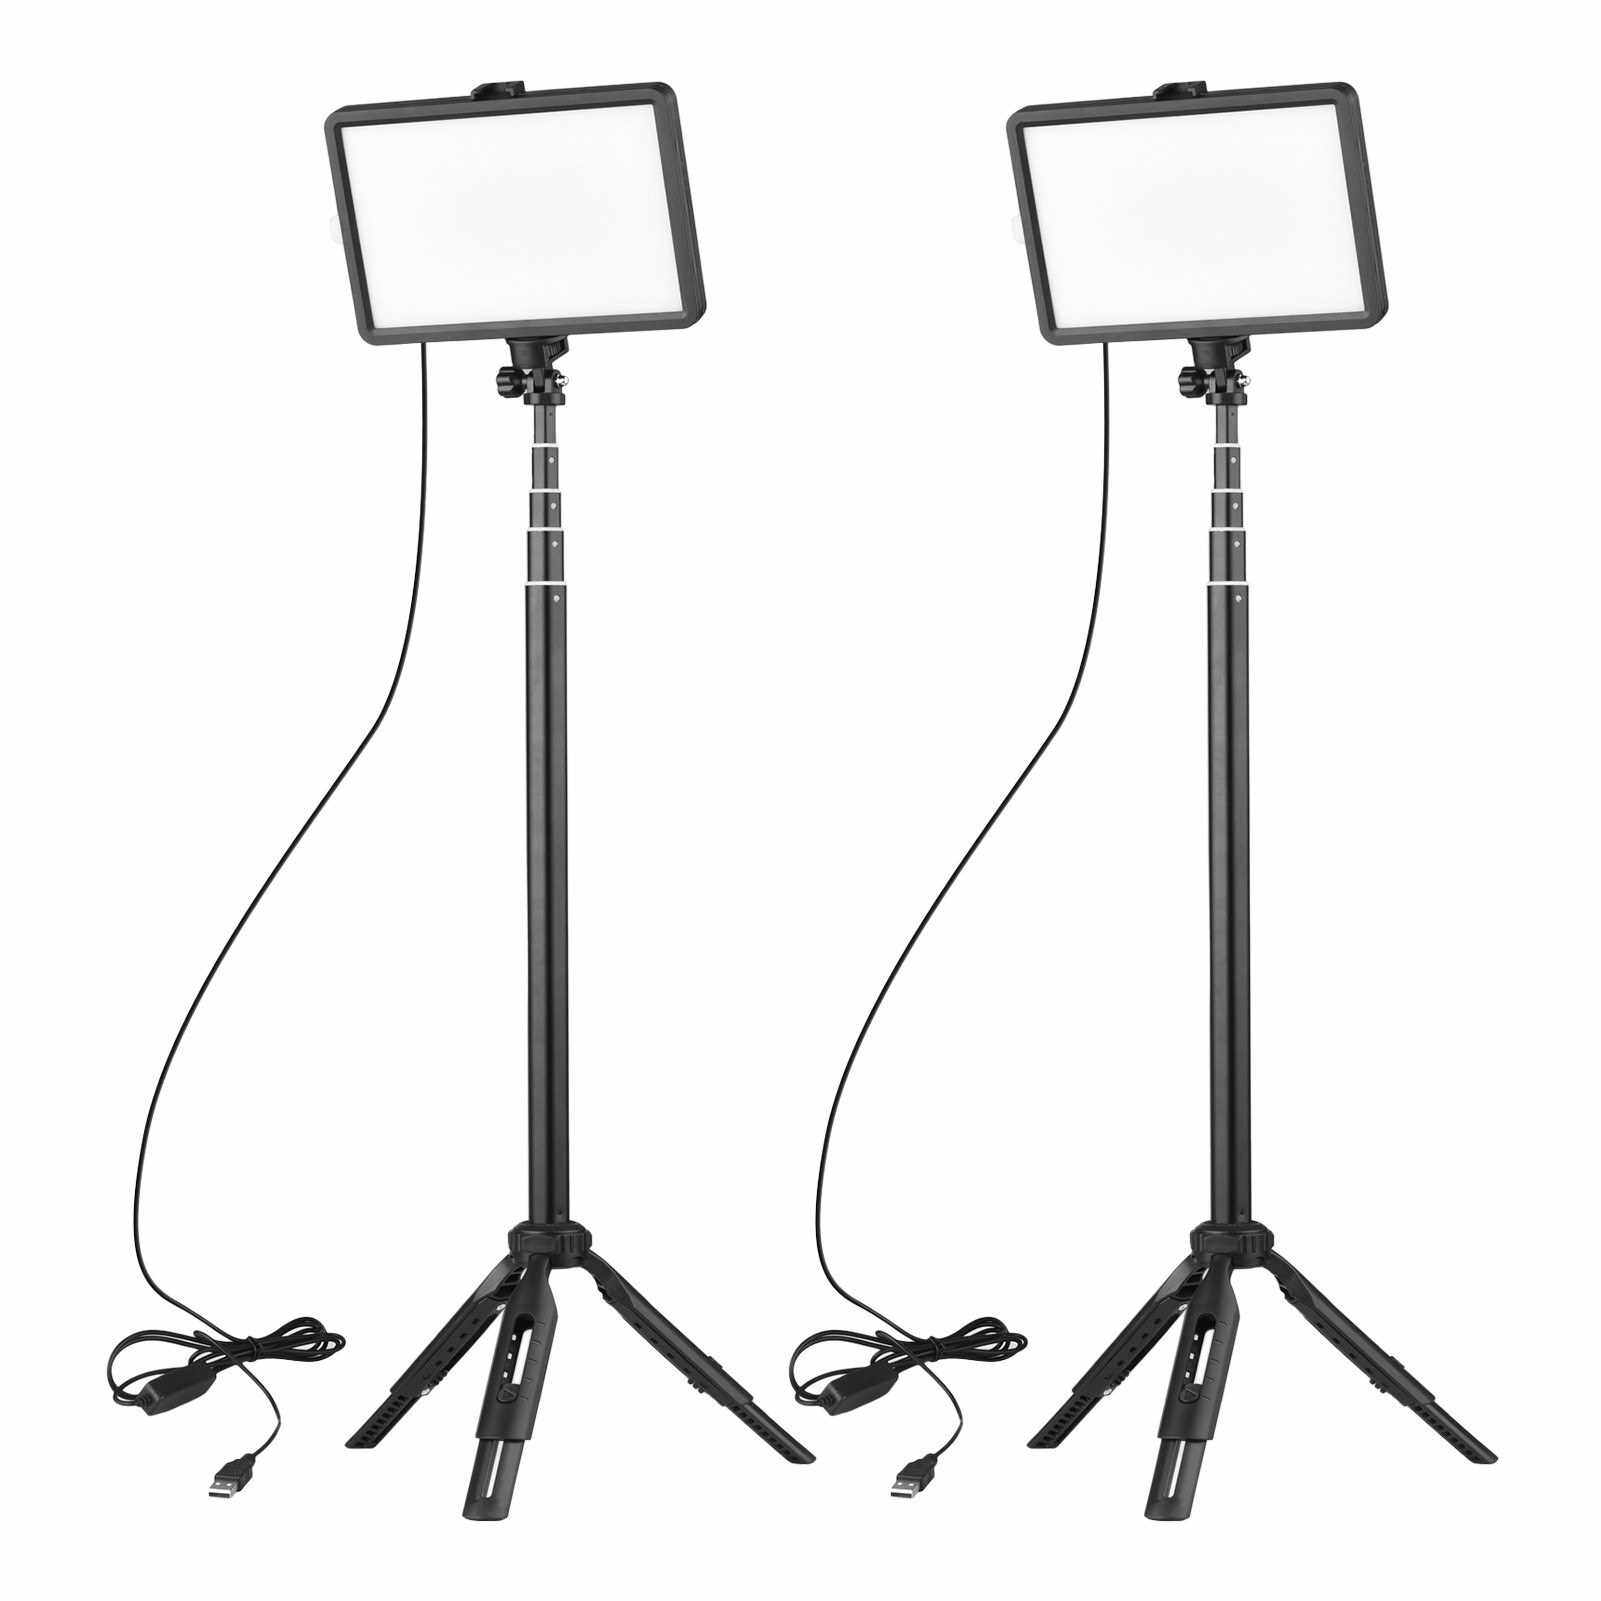 Andoer Portable RGB Video Light Kit with 2 * LED Video Light 7 Colors Lighting 3200K-5600K 10 Levels Brightness USB Powered + 2 * Extendable Tripod Max.148cm/58in Height for Video Conference Live Streaming Online Teaching (Standard)